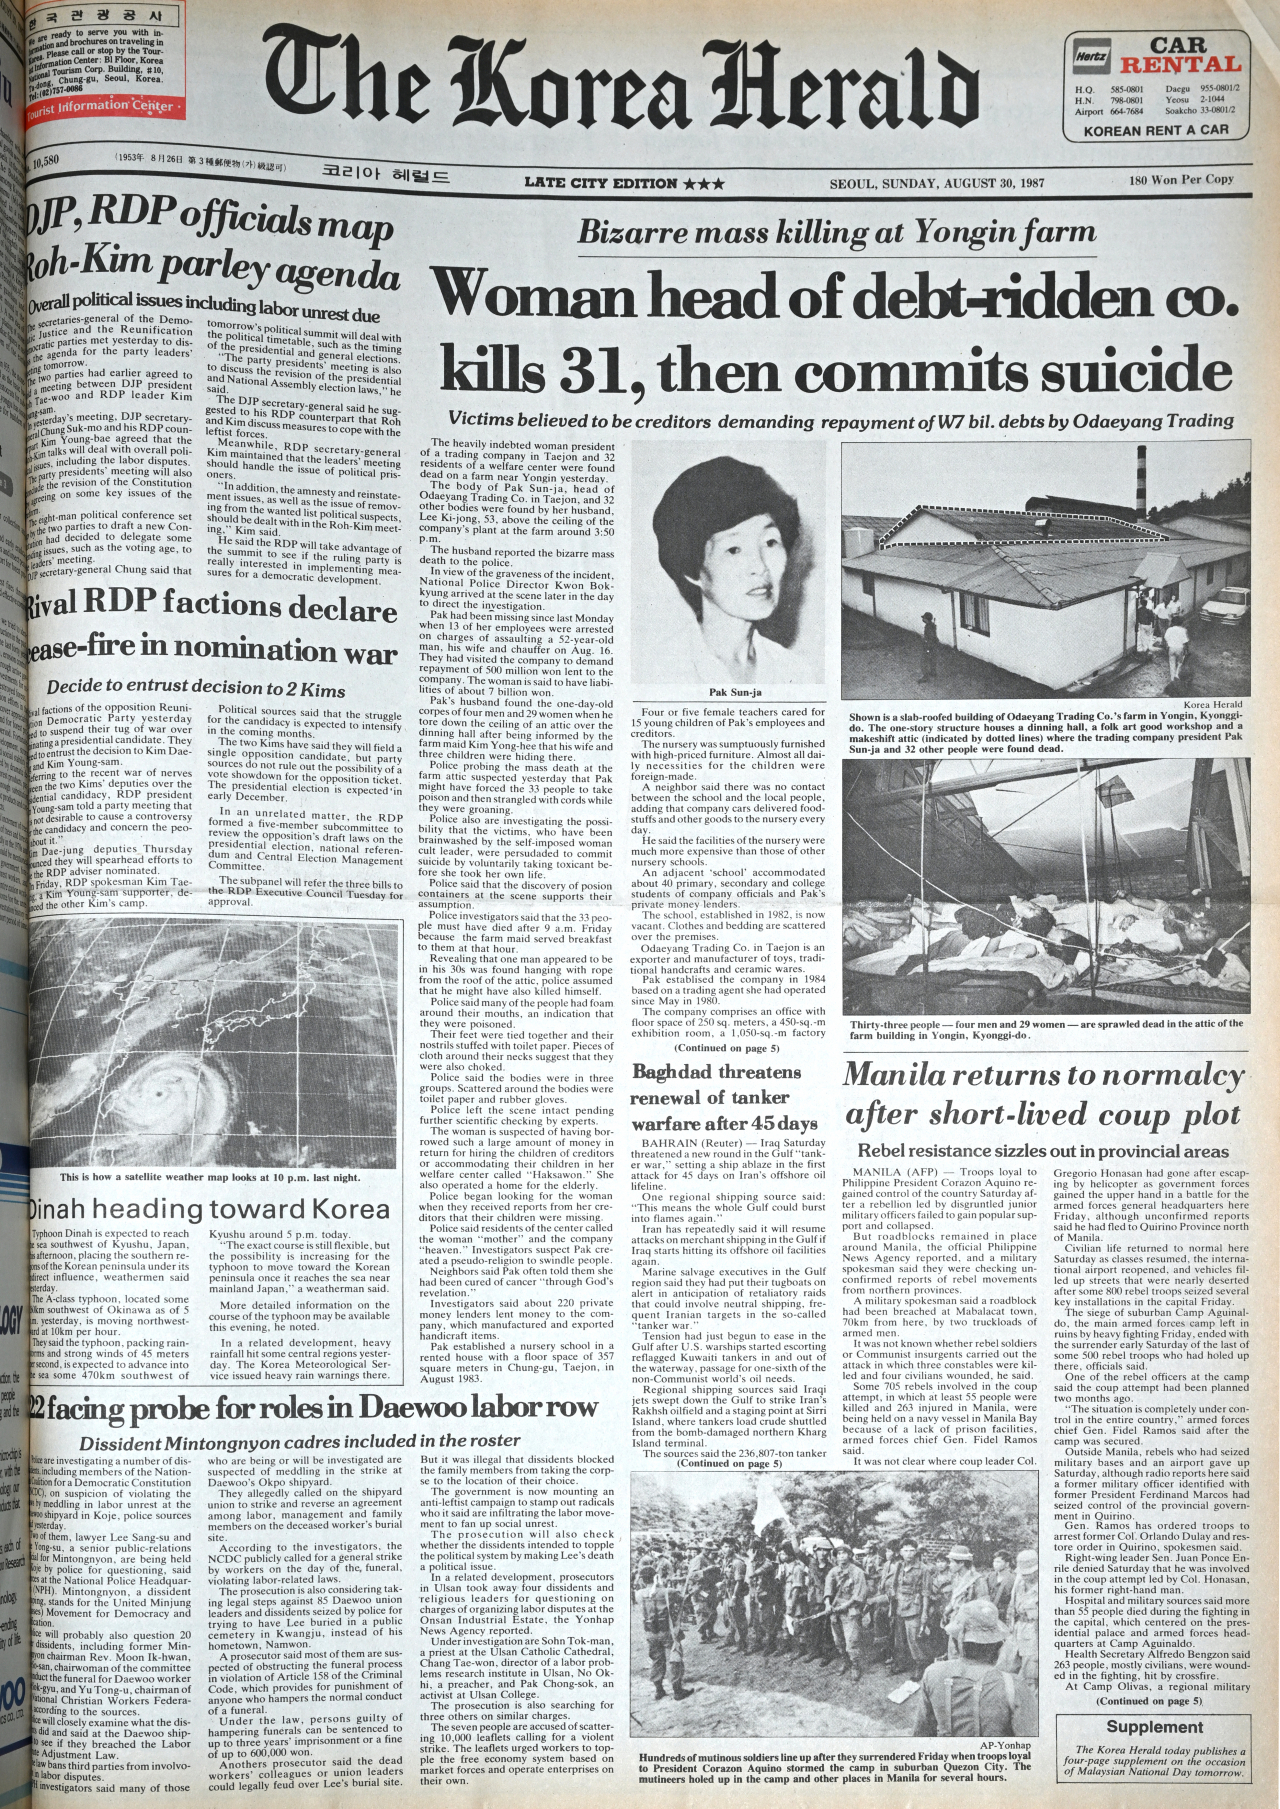 The Aug. 30, 1987 edition of The Korea Herald covers the mass murder-suicide of the head and followers of the Odaeyang clt that took place in a factory in Yongin, Gyeonggi Province. (The Korea Herald)